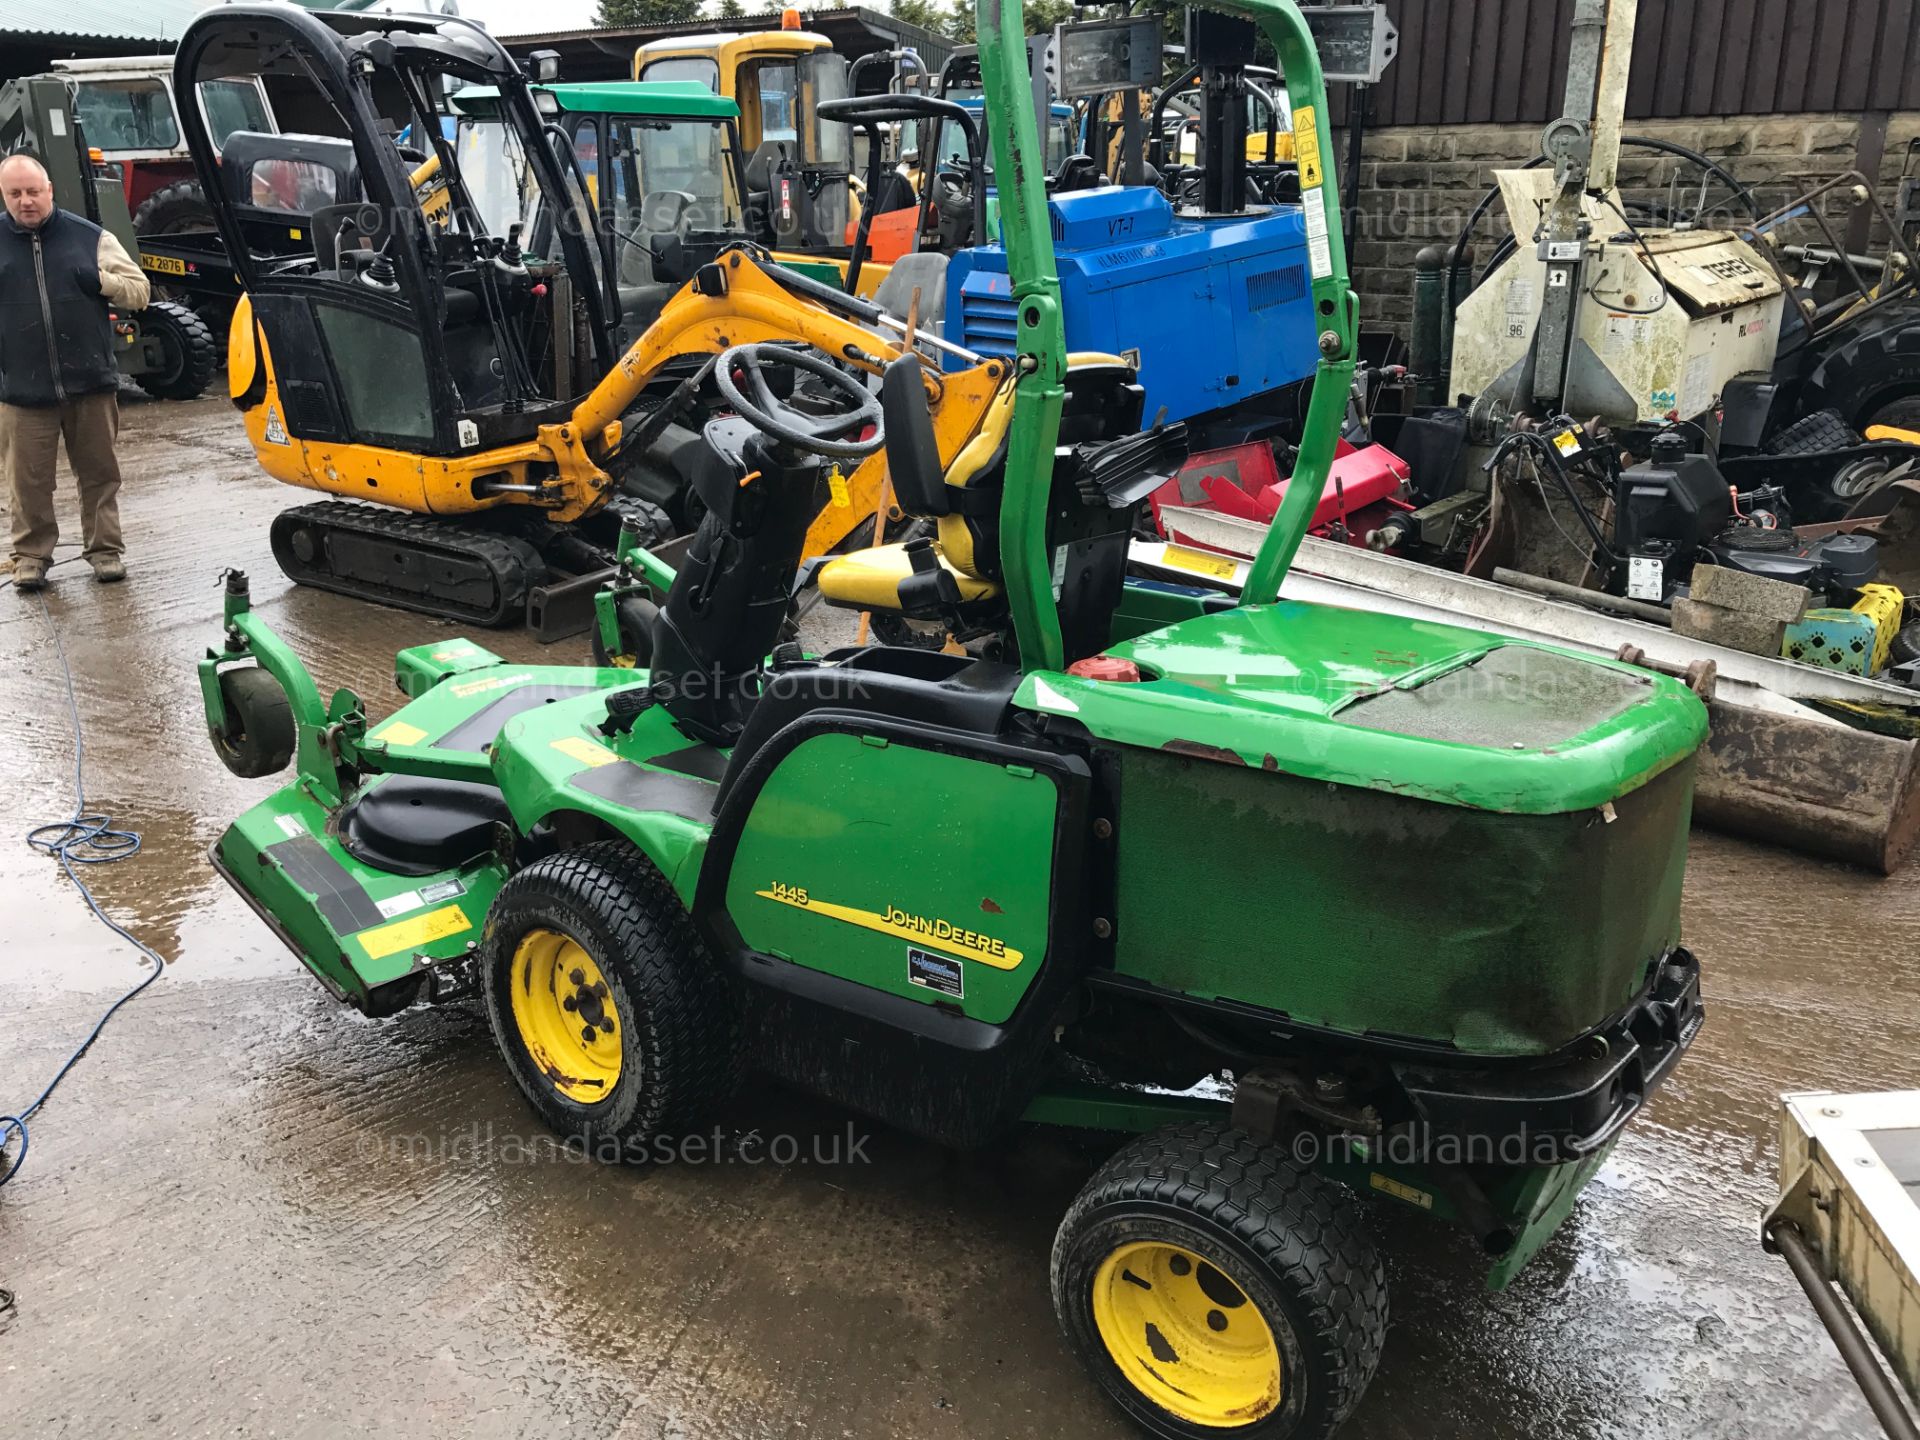 DS - 2008 JOHN DEERE FASTBAC RIDE ON MOWER   YEAR OF MANUFACTURE: 2008 MODEL: 1565 TOTAL PERMISSABLE - Image 6 of 9